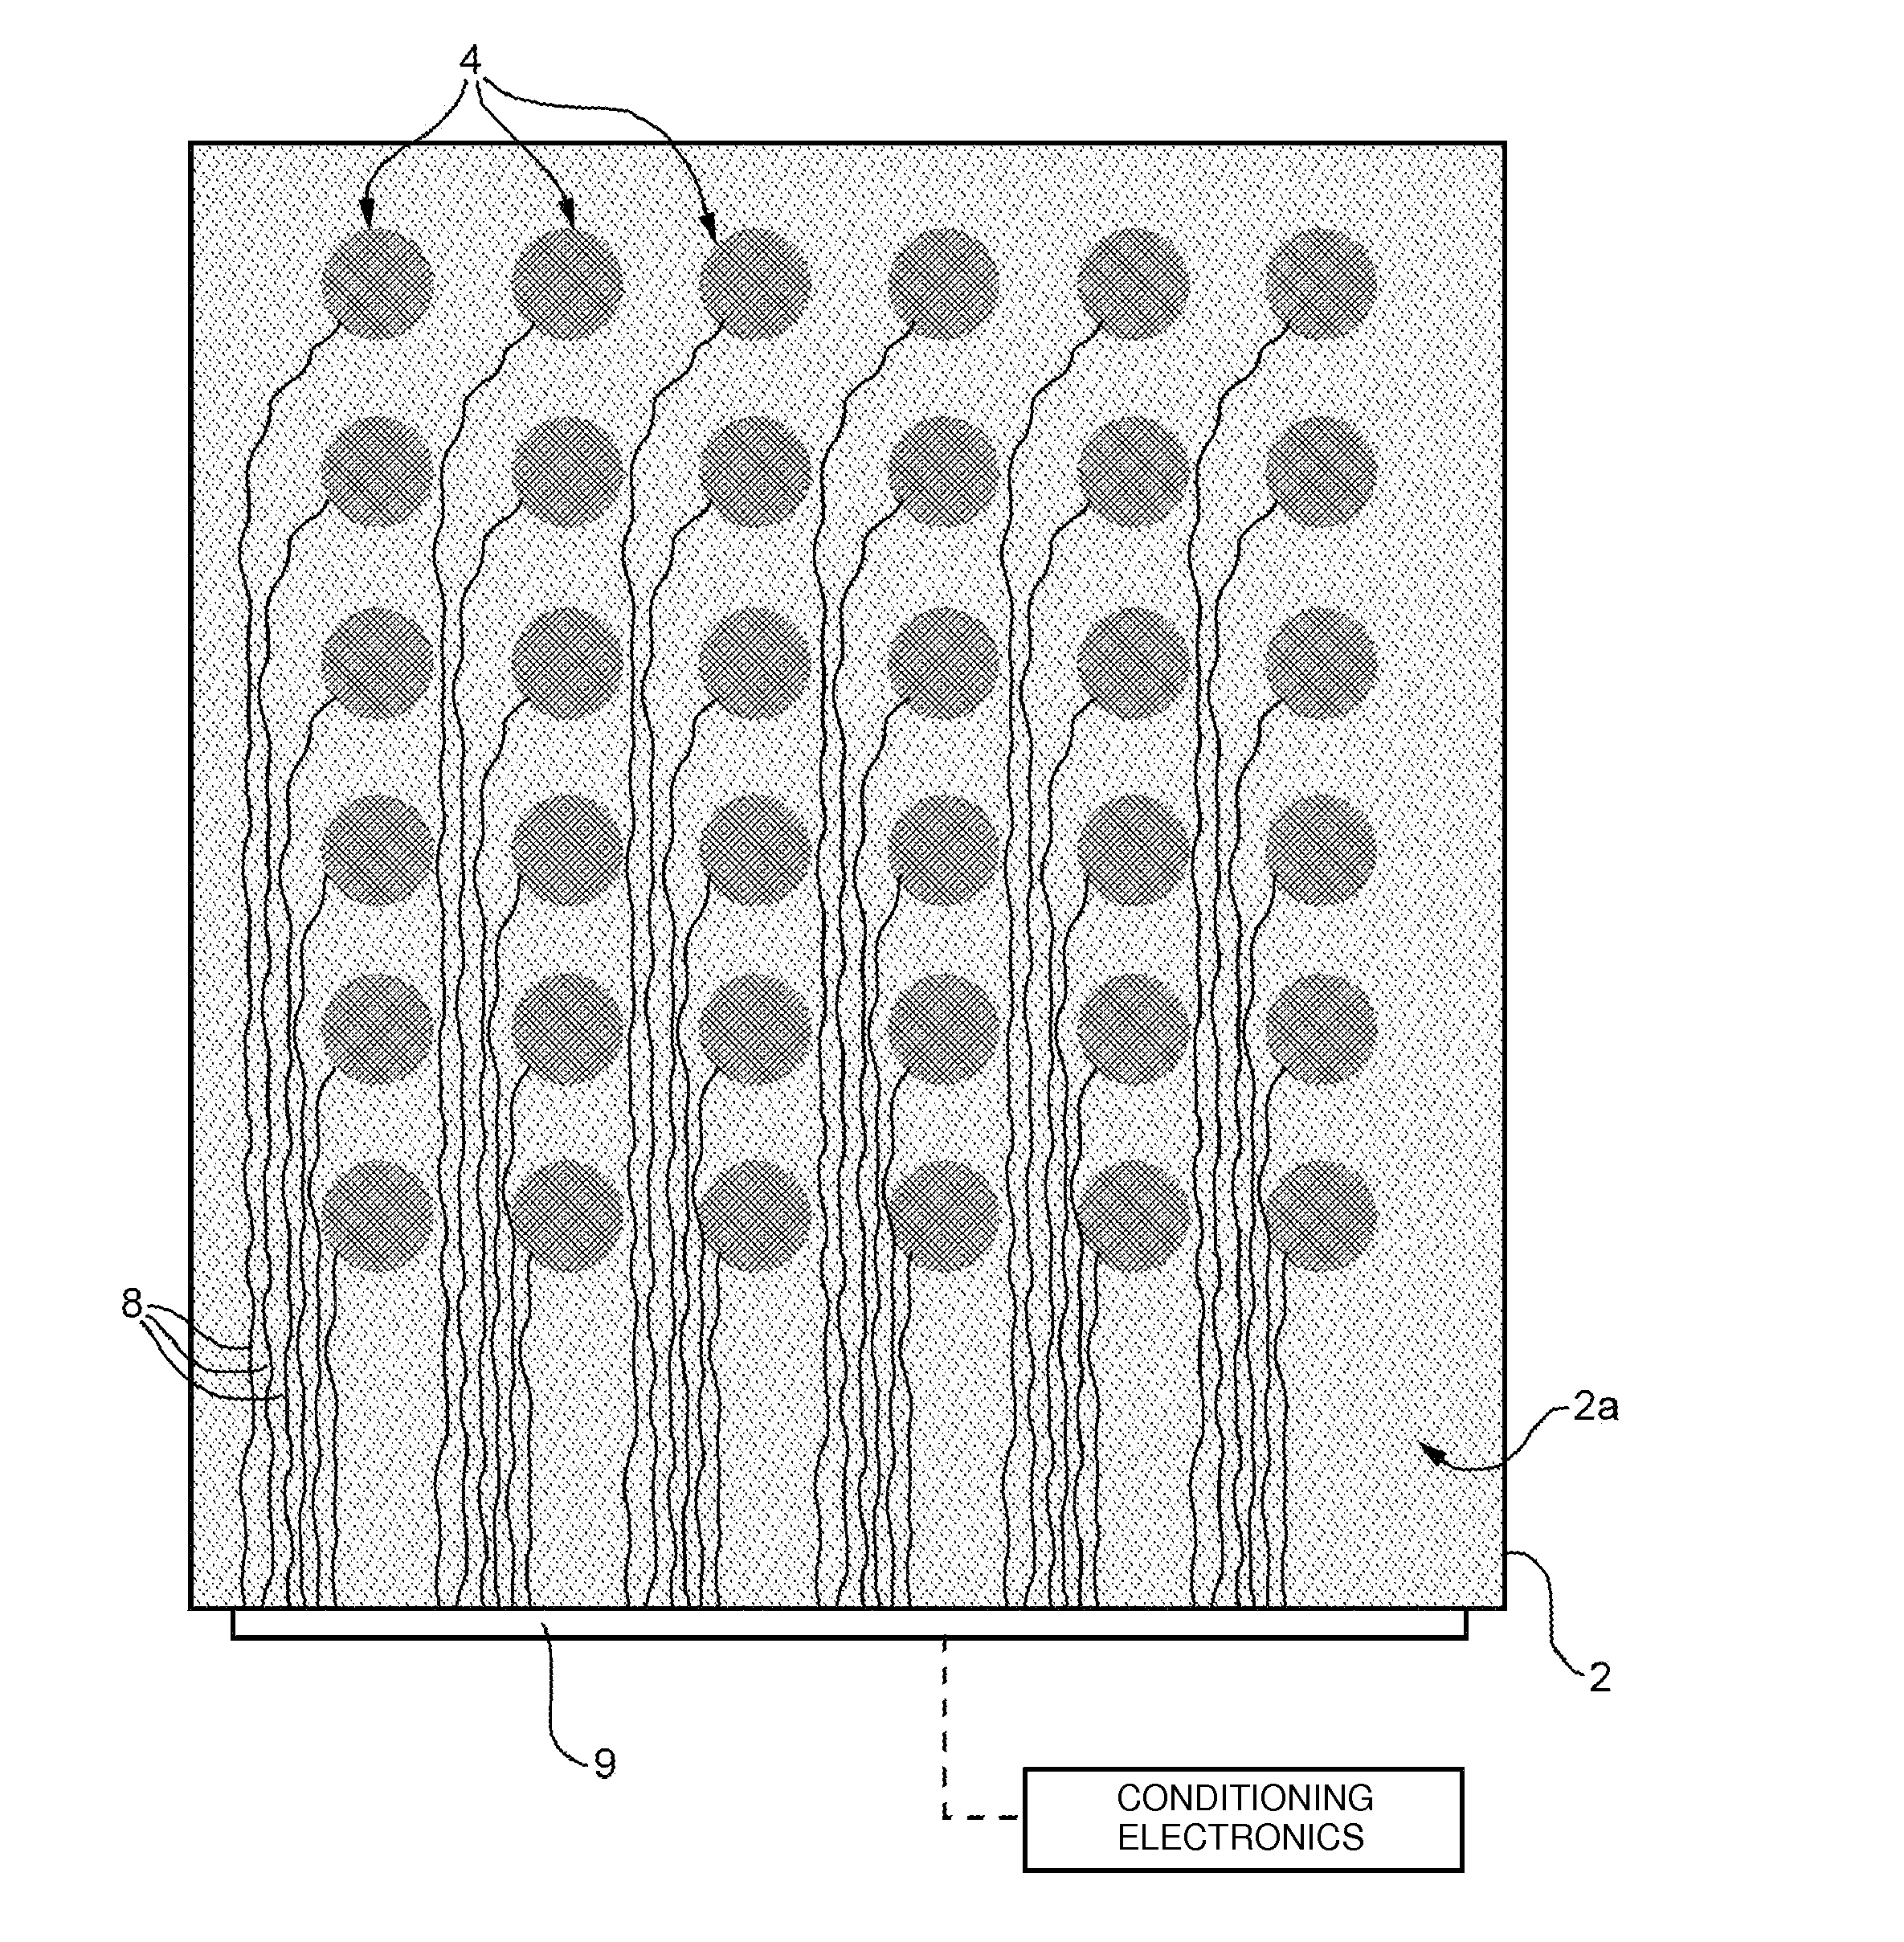 Textile electrode device for acquisition of electrophysiological signals from the skin and manufacturing process thereof